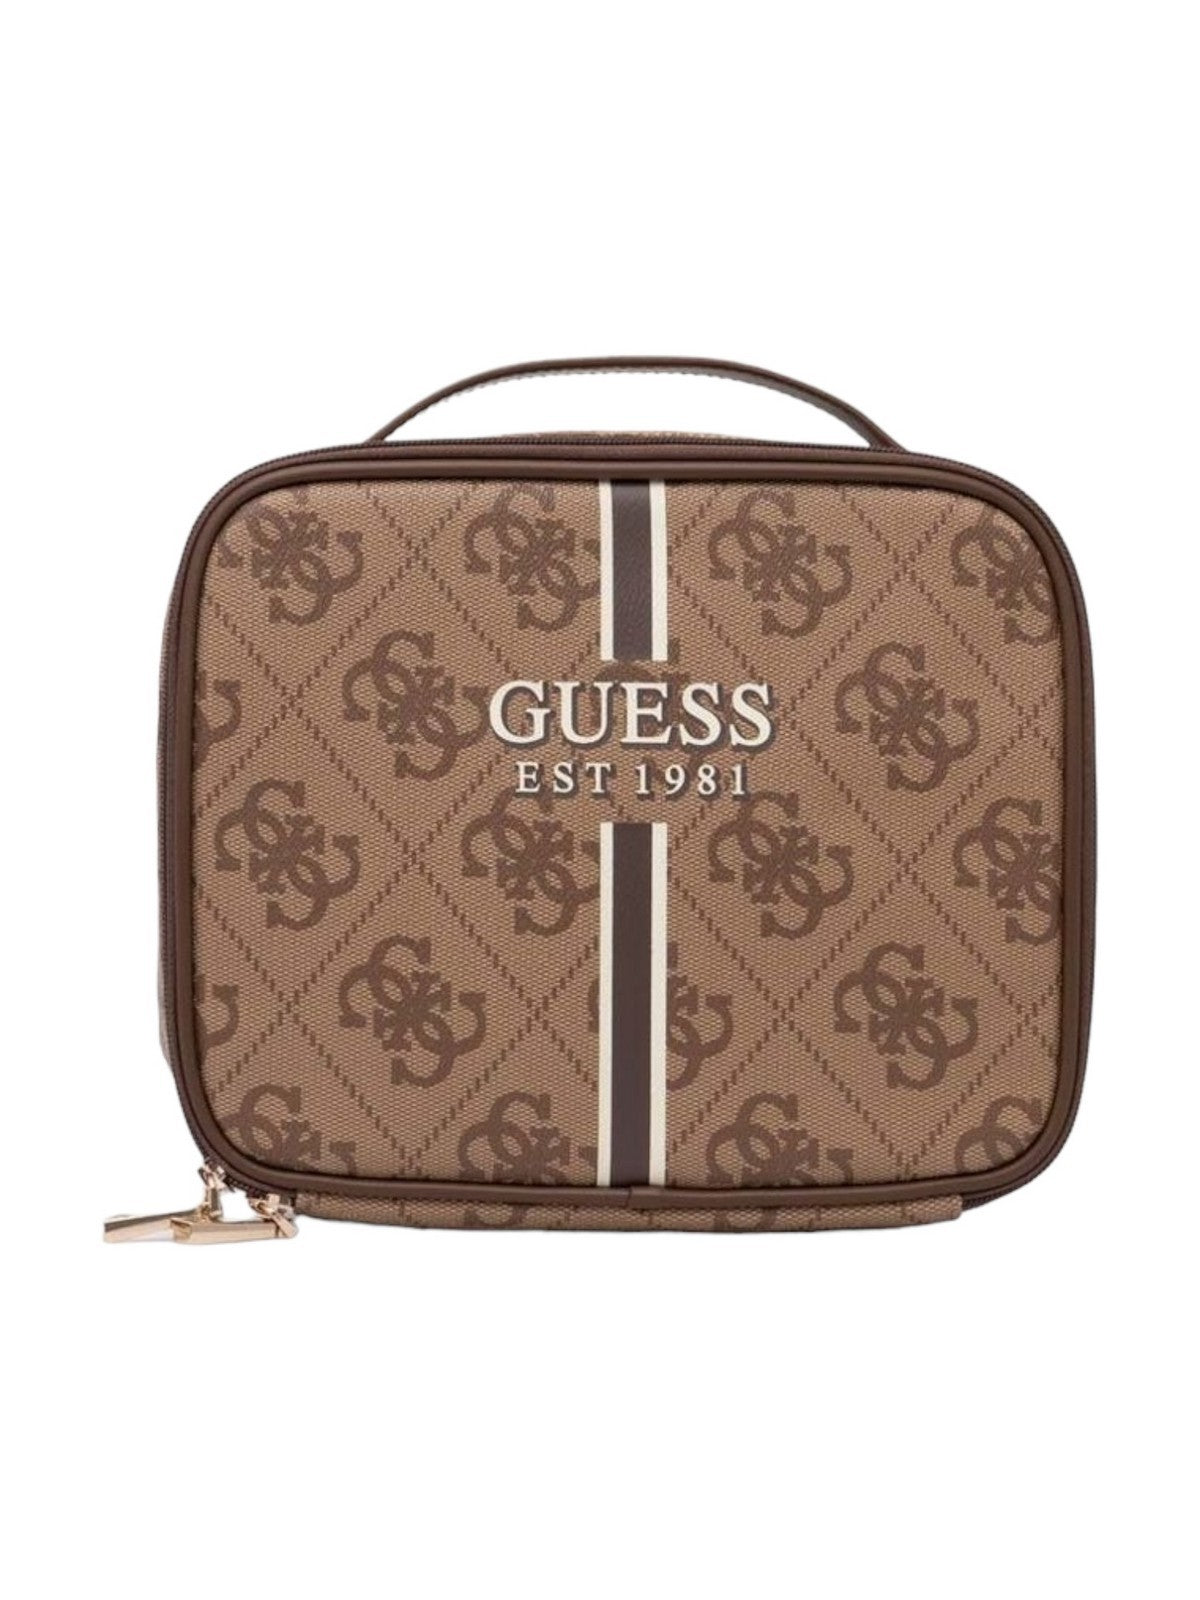 GUESS Beauty case Femme Kallisto Cosmetic Or TWB760 40450 LAM Brown